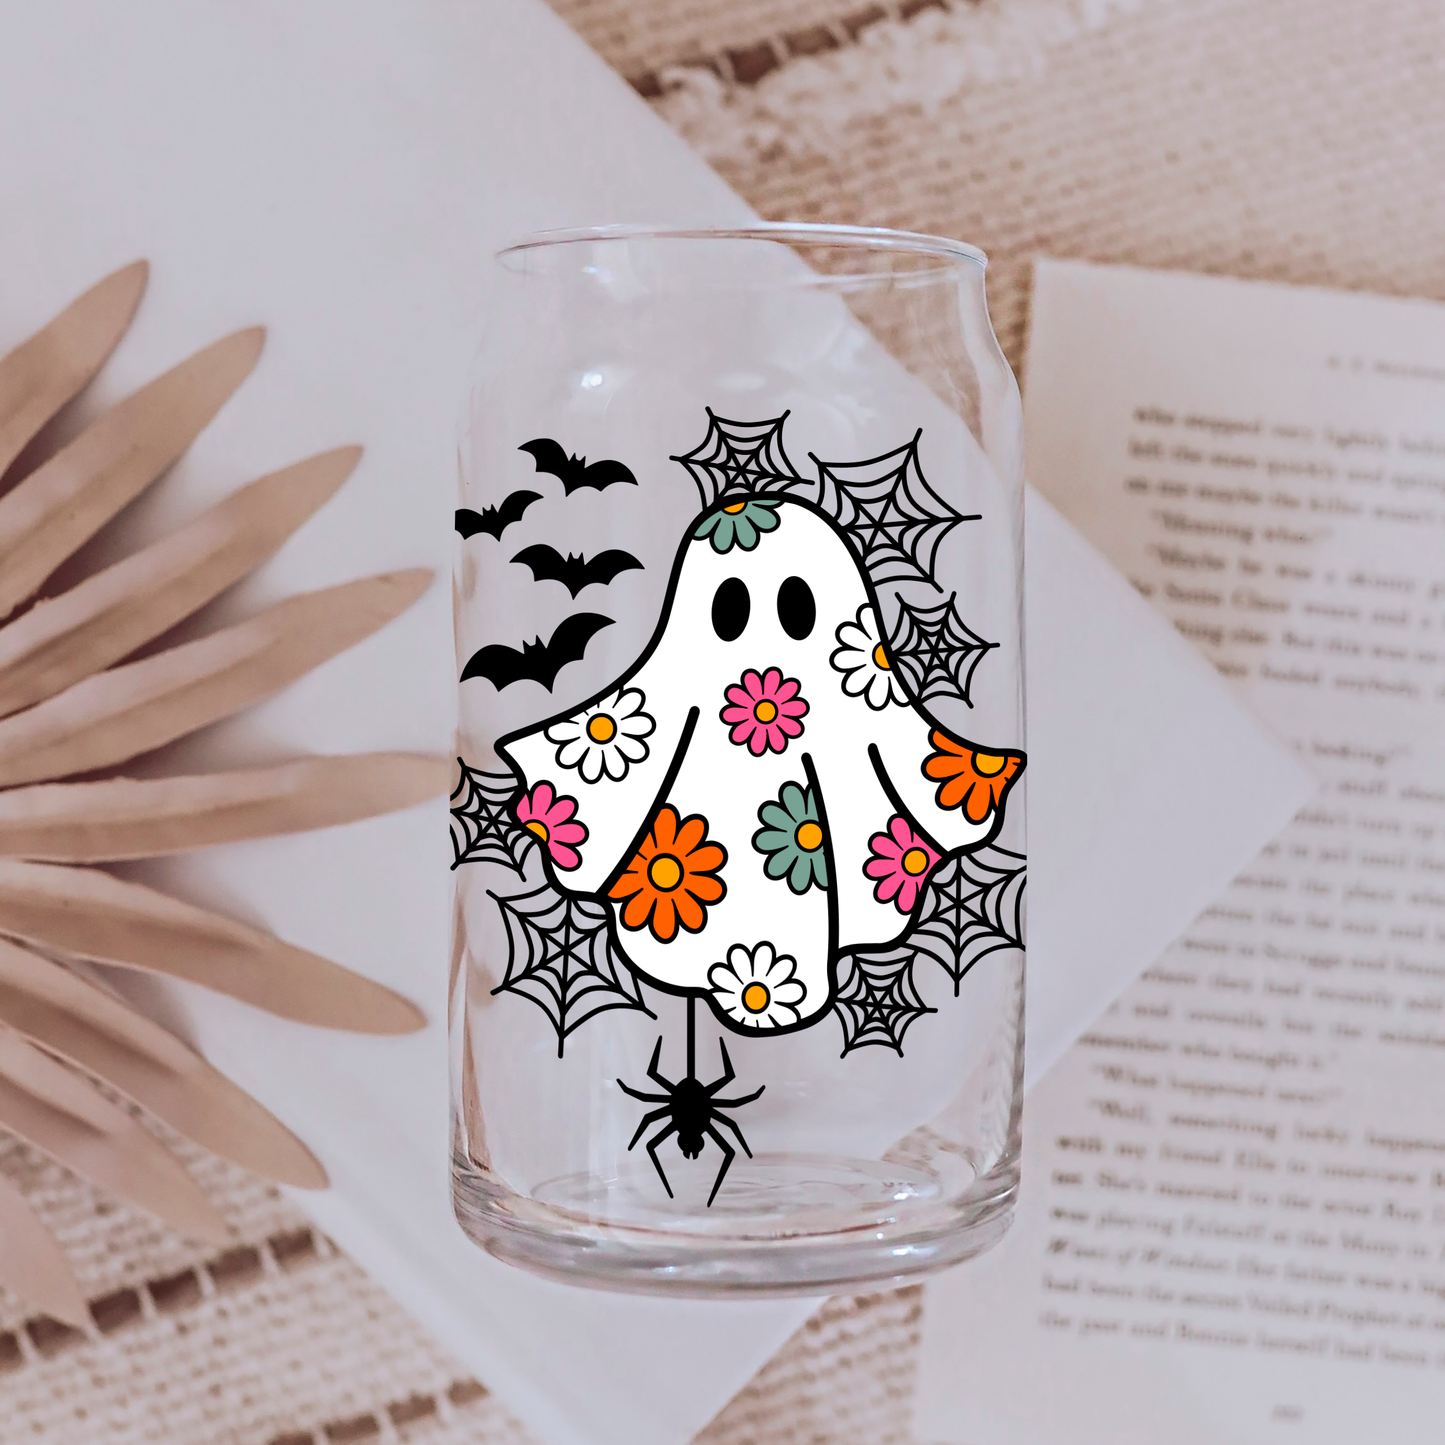 Spooky Daisy Ghost SVG Decal